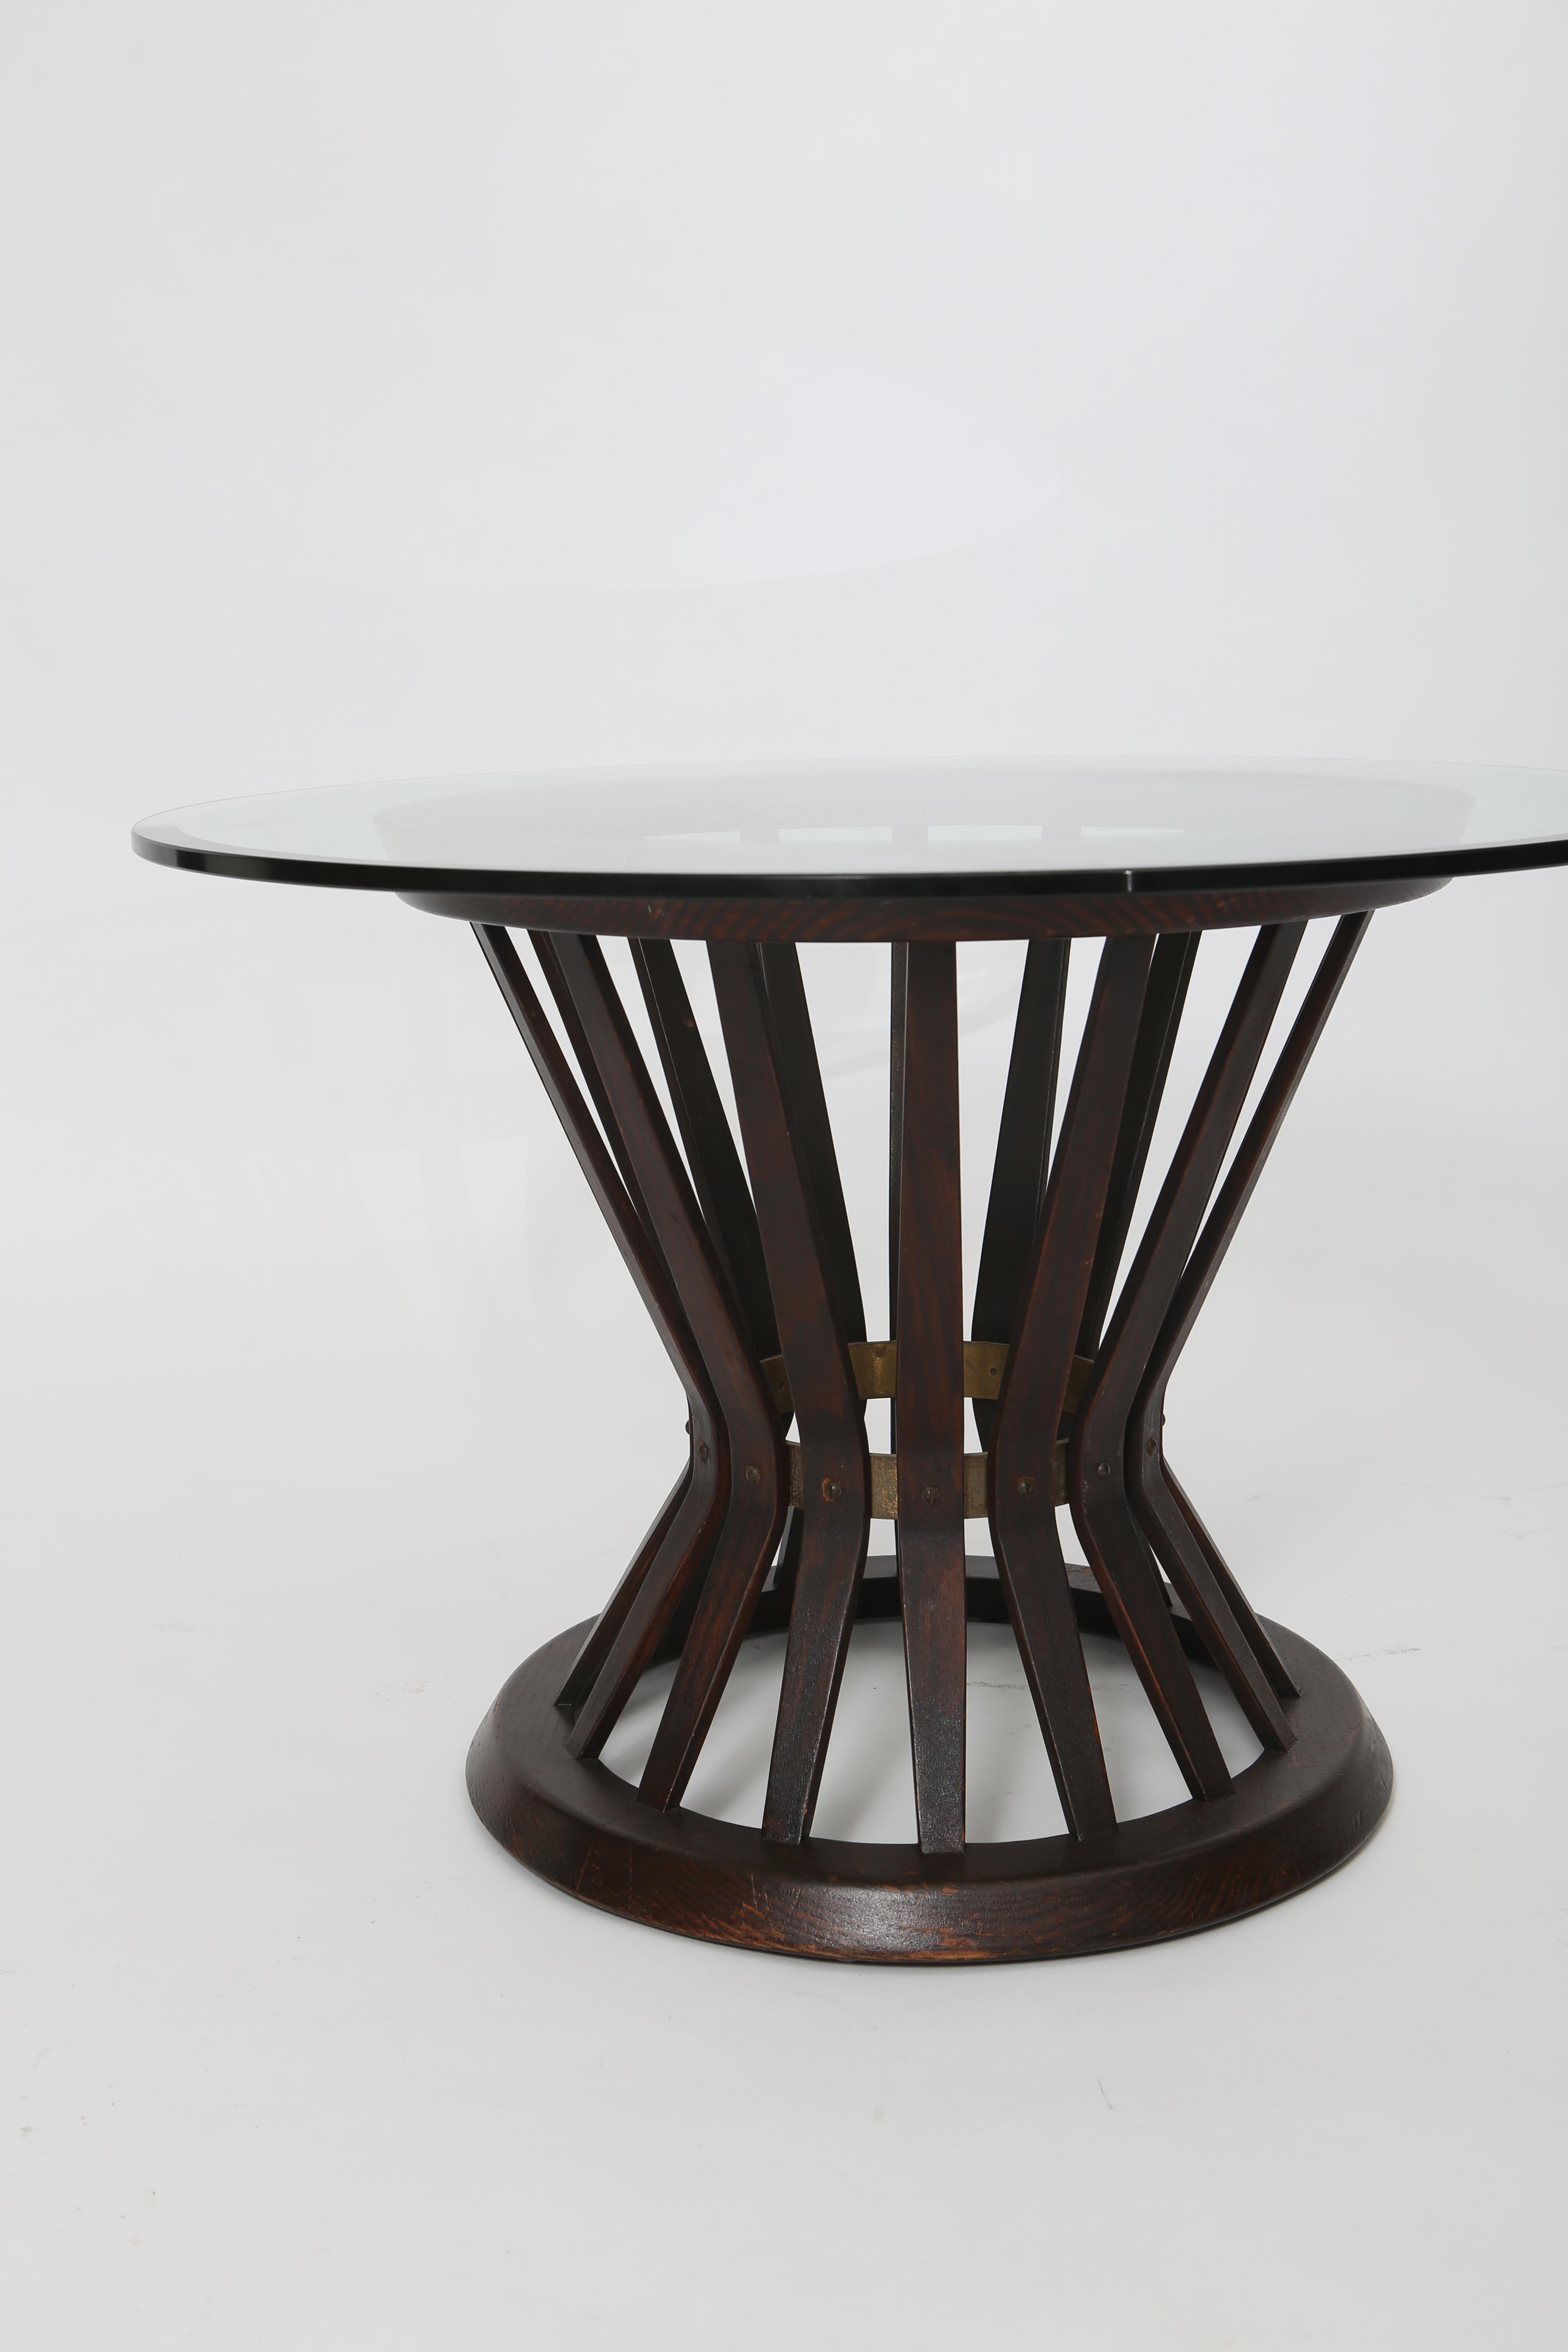 “Sheaf of Wheat” side table with glass top by Edward Wormley for Dunbar. Dark-stained oak vertical slats bend and taper at center; accented by a ring of lovely patinated brass. Original finish shows signs of age and use. Glass top 1/2” thick with